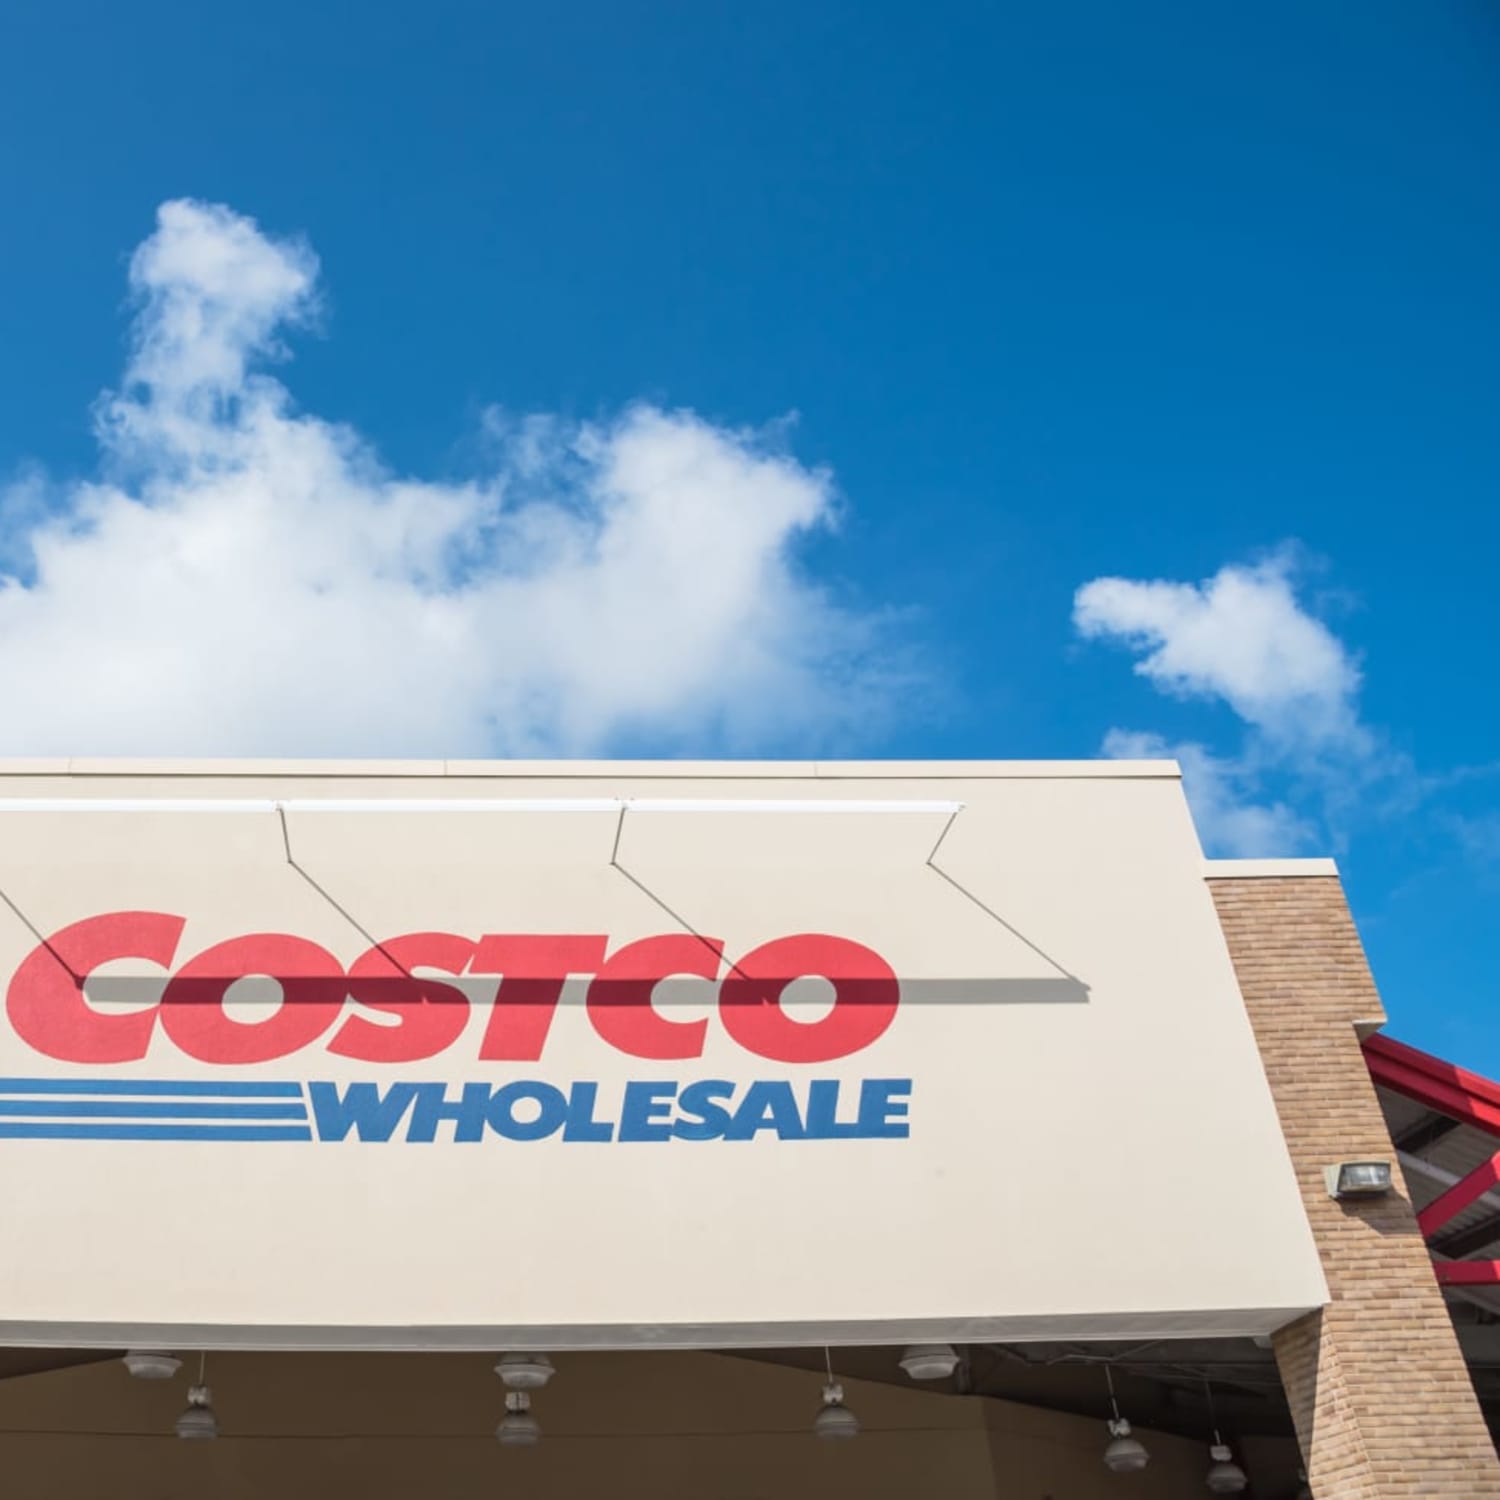 No, you don't need to buy Costco's $4,500, 157-piece Le Creuset